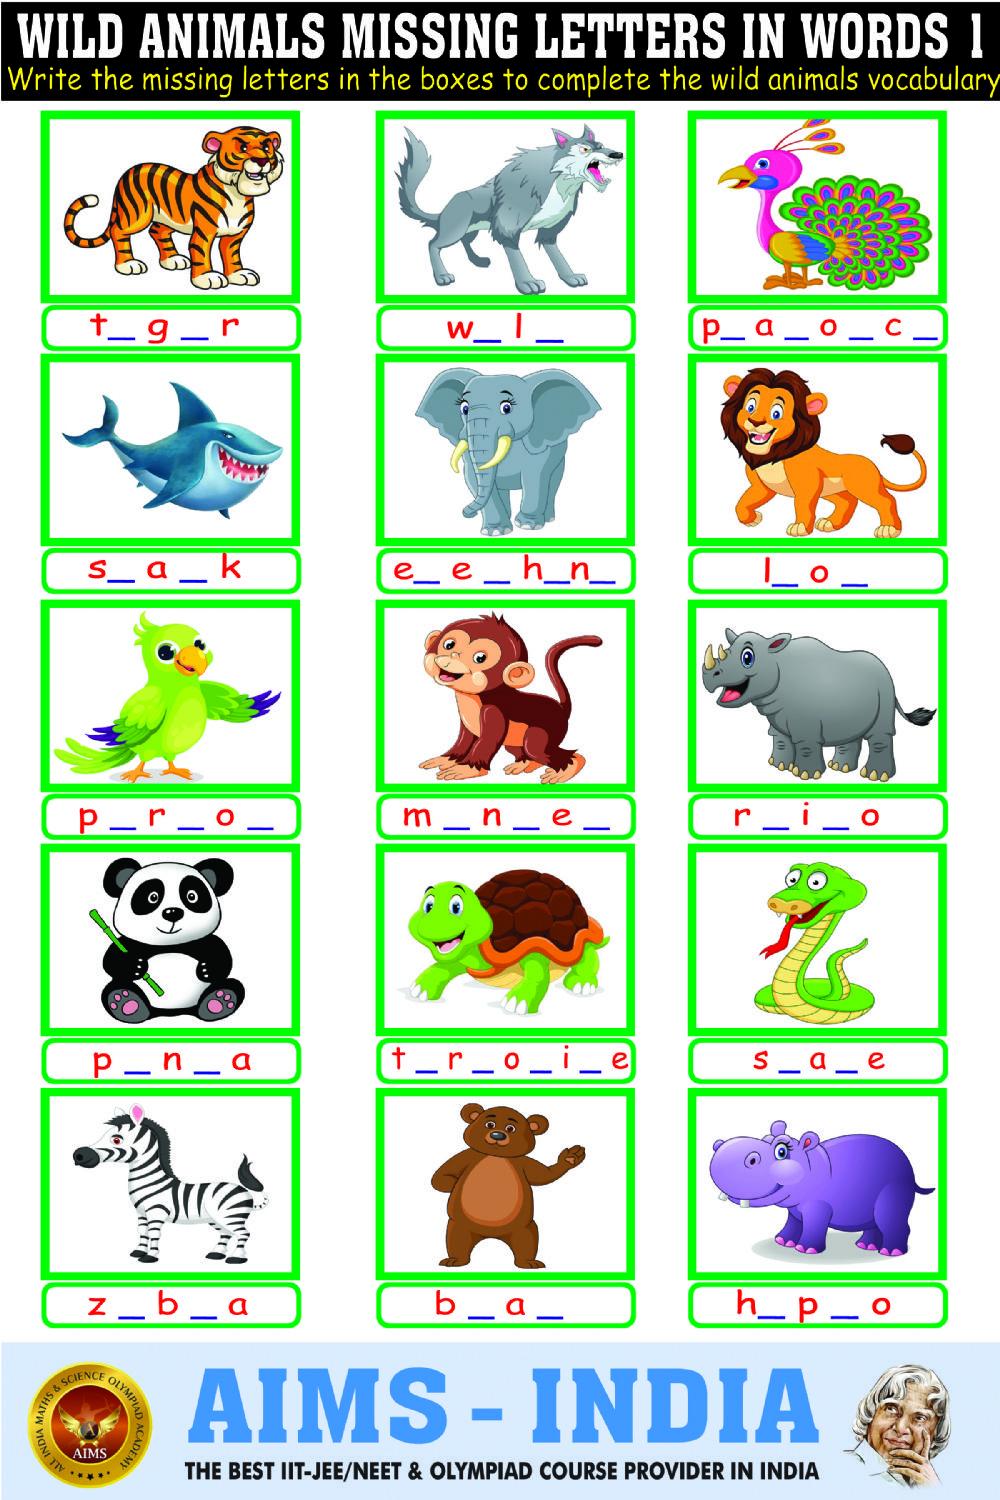 Wild animals missing letters 01